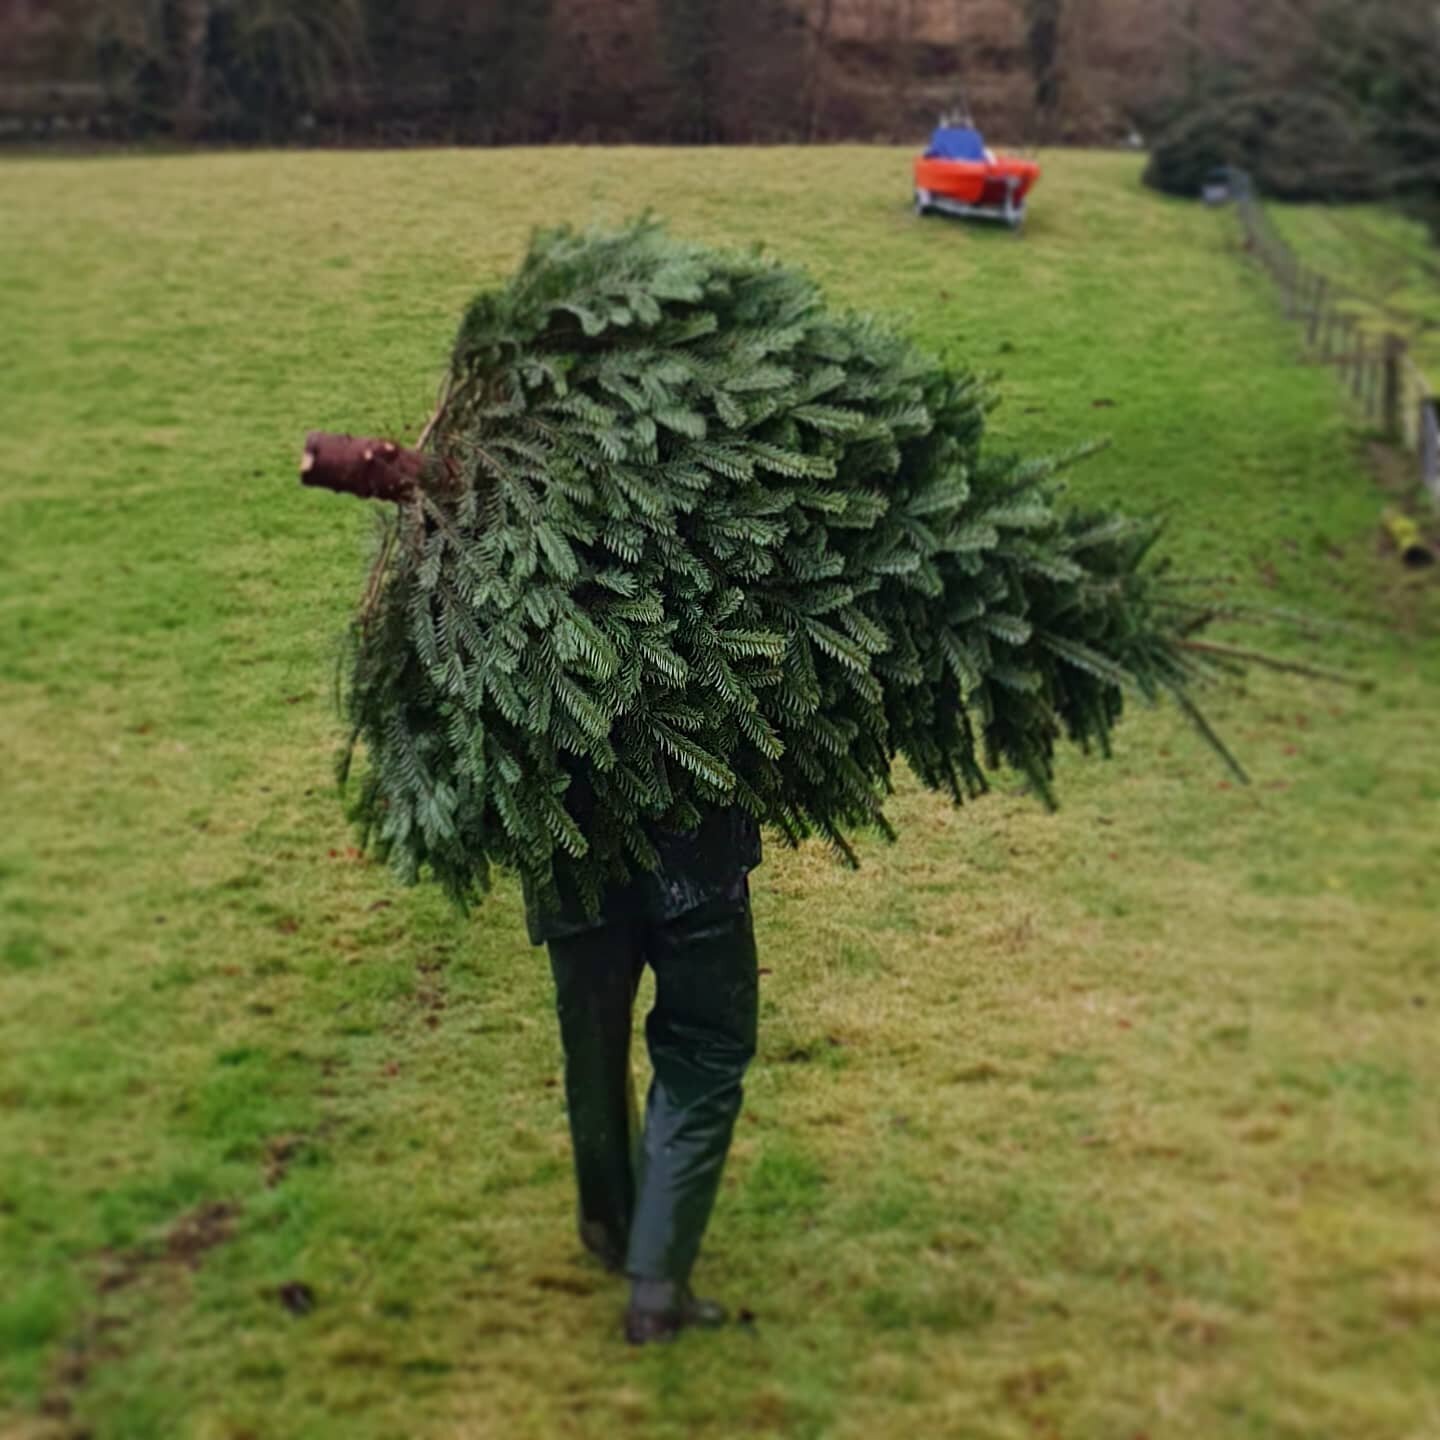 Another tree cut fresh from the field, ready for its new home...delivering it this way might take a while though so thankfully we have a courier that can travel nationwide!
.
.
.
#characterchristmastrees #christmasdelivered #nordmann #nondrop #christ